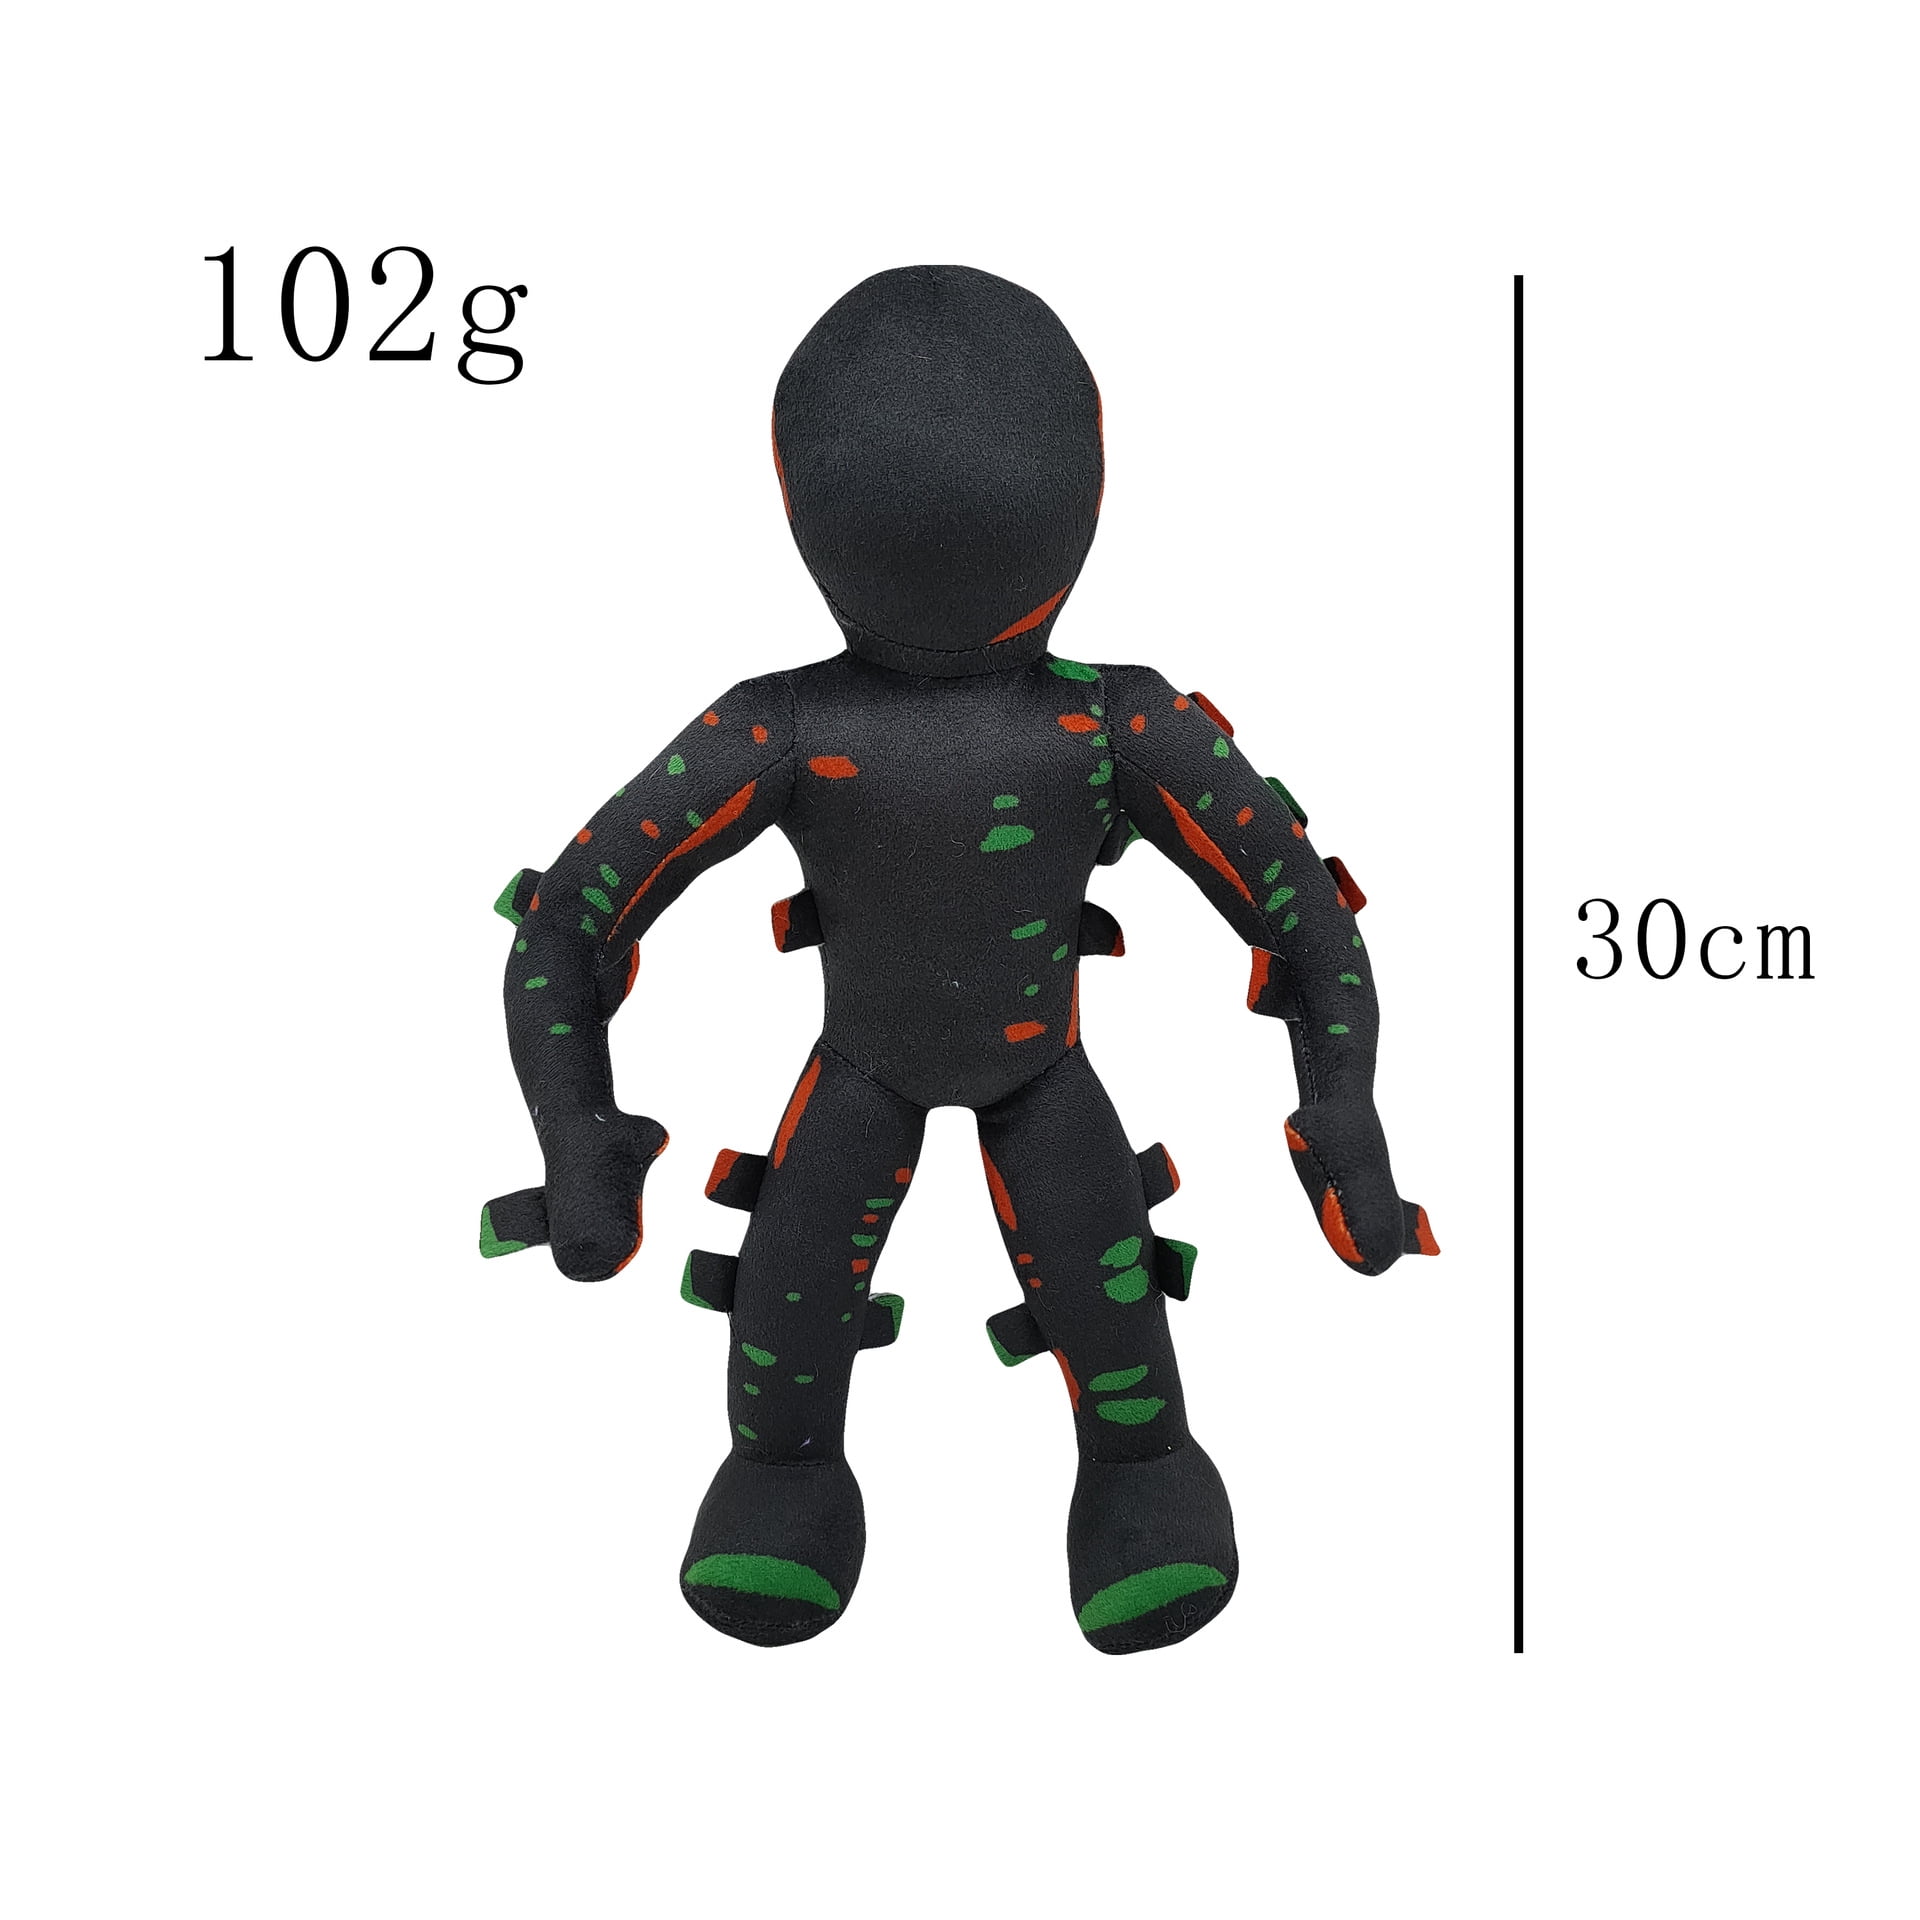 Doors Plush - 9 Jack Plushies Toy for Fans Gift, 2022 New Monster Horror  Game Stuffed Figure Doll for Kids and Adults, Halloween Christmas Birthday